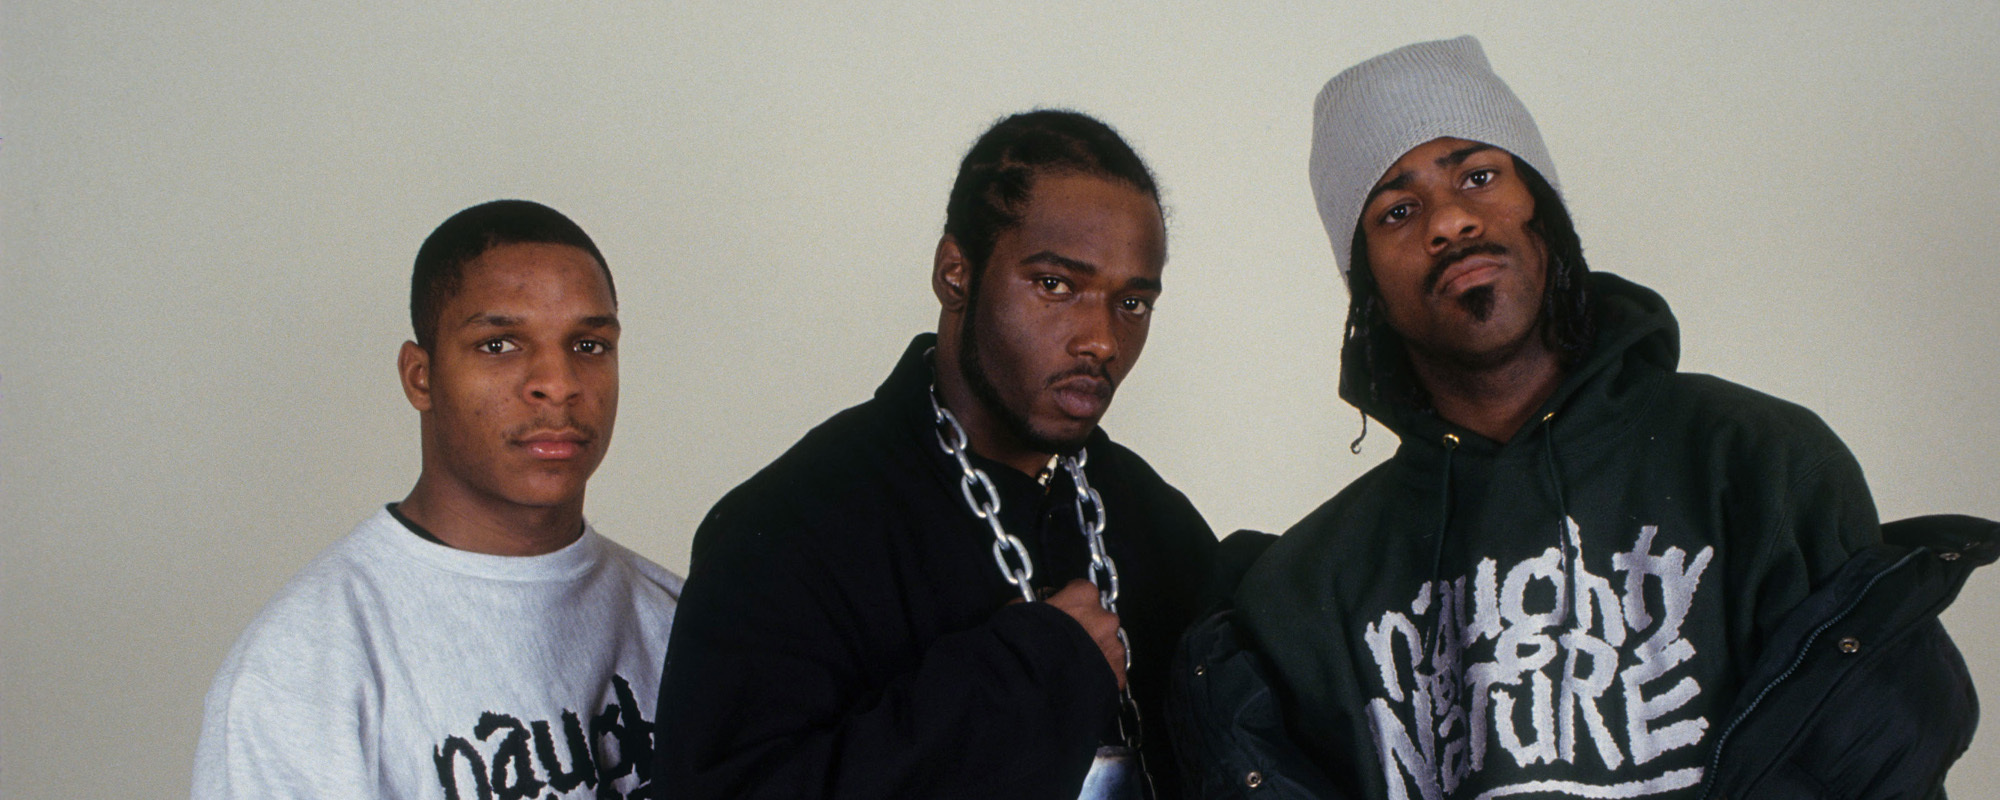 The Origins of Naughty by Nature